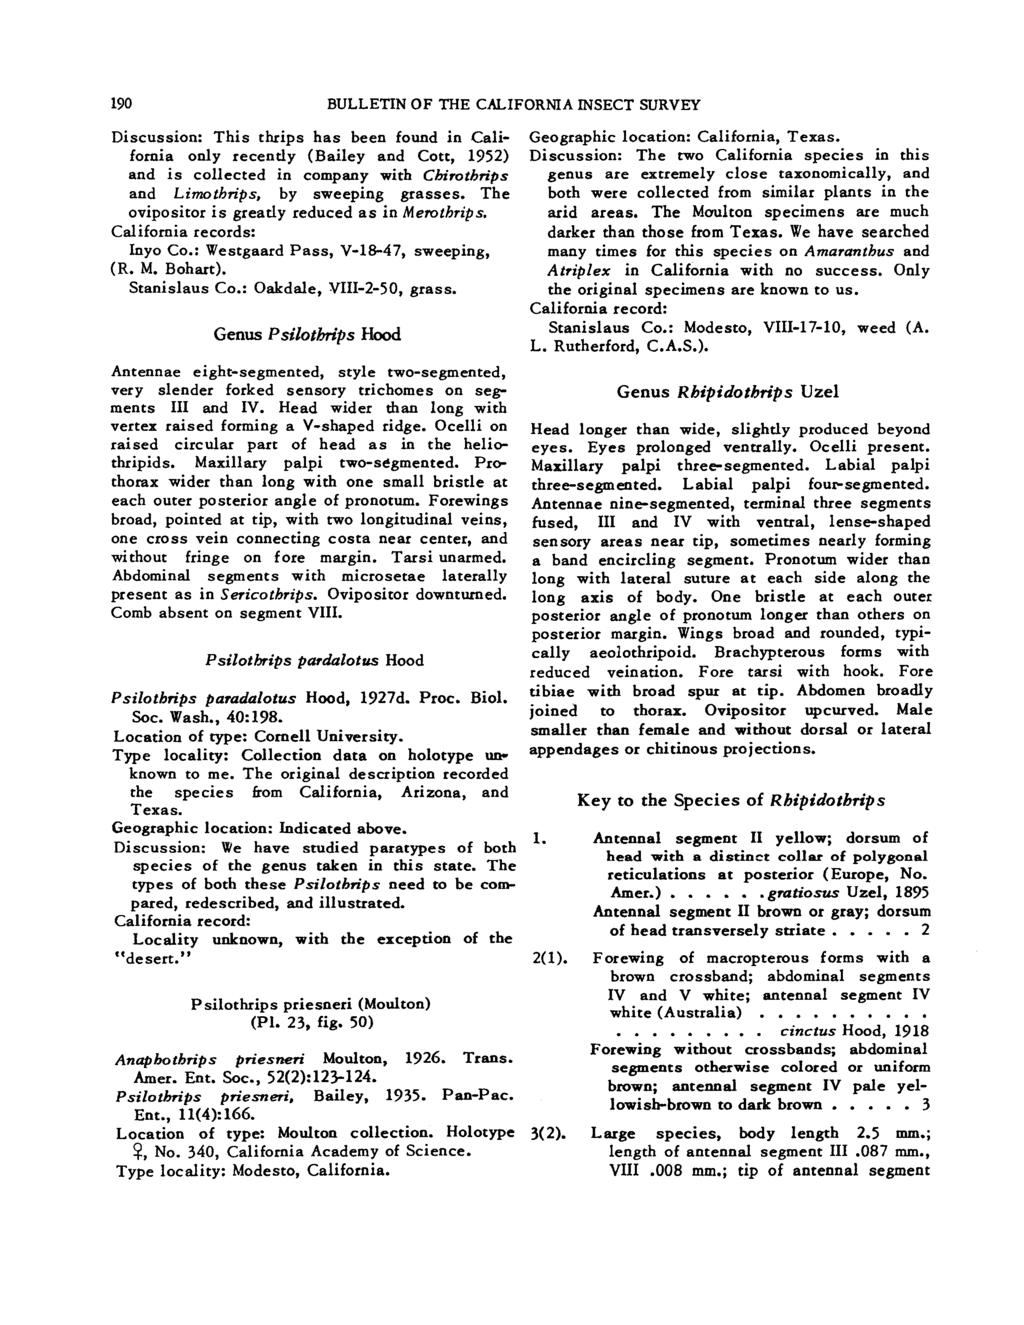 190 BULLETIN OF THE CALIFORNIA INSECT SURVEY Discussion: This thrips has been found in California only recently (Bailey and Cott, 1952) and is collected in company with Chirothn'ps and Limothn'ps, by